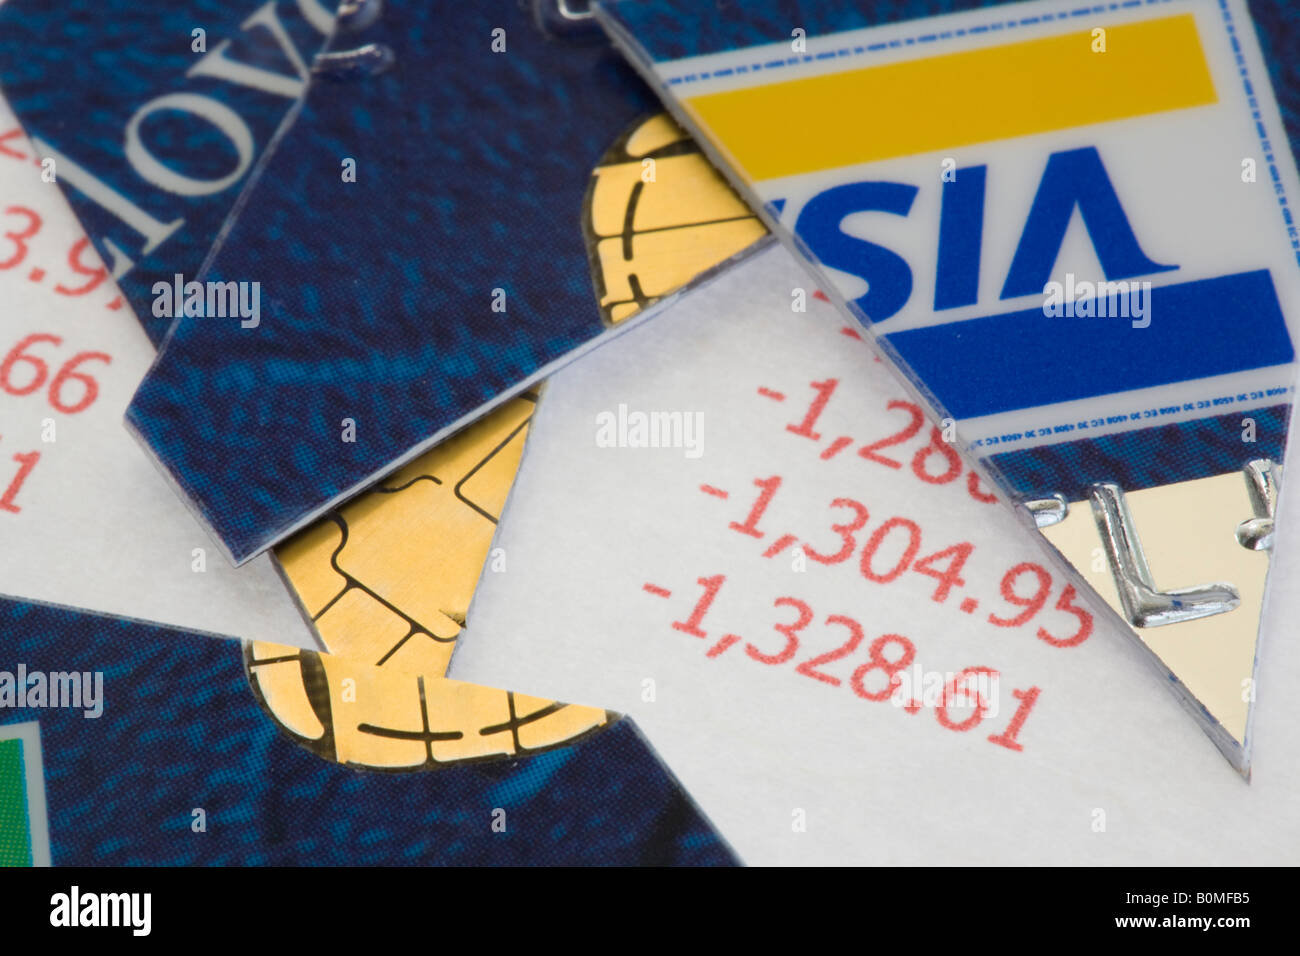 Cut Visa credit card in pieces on statement in red in close up Stock Photo